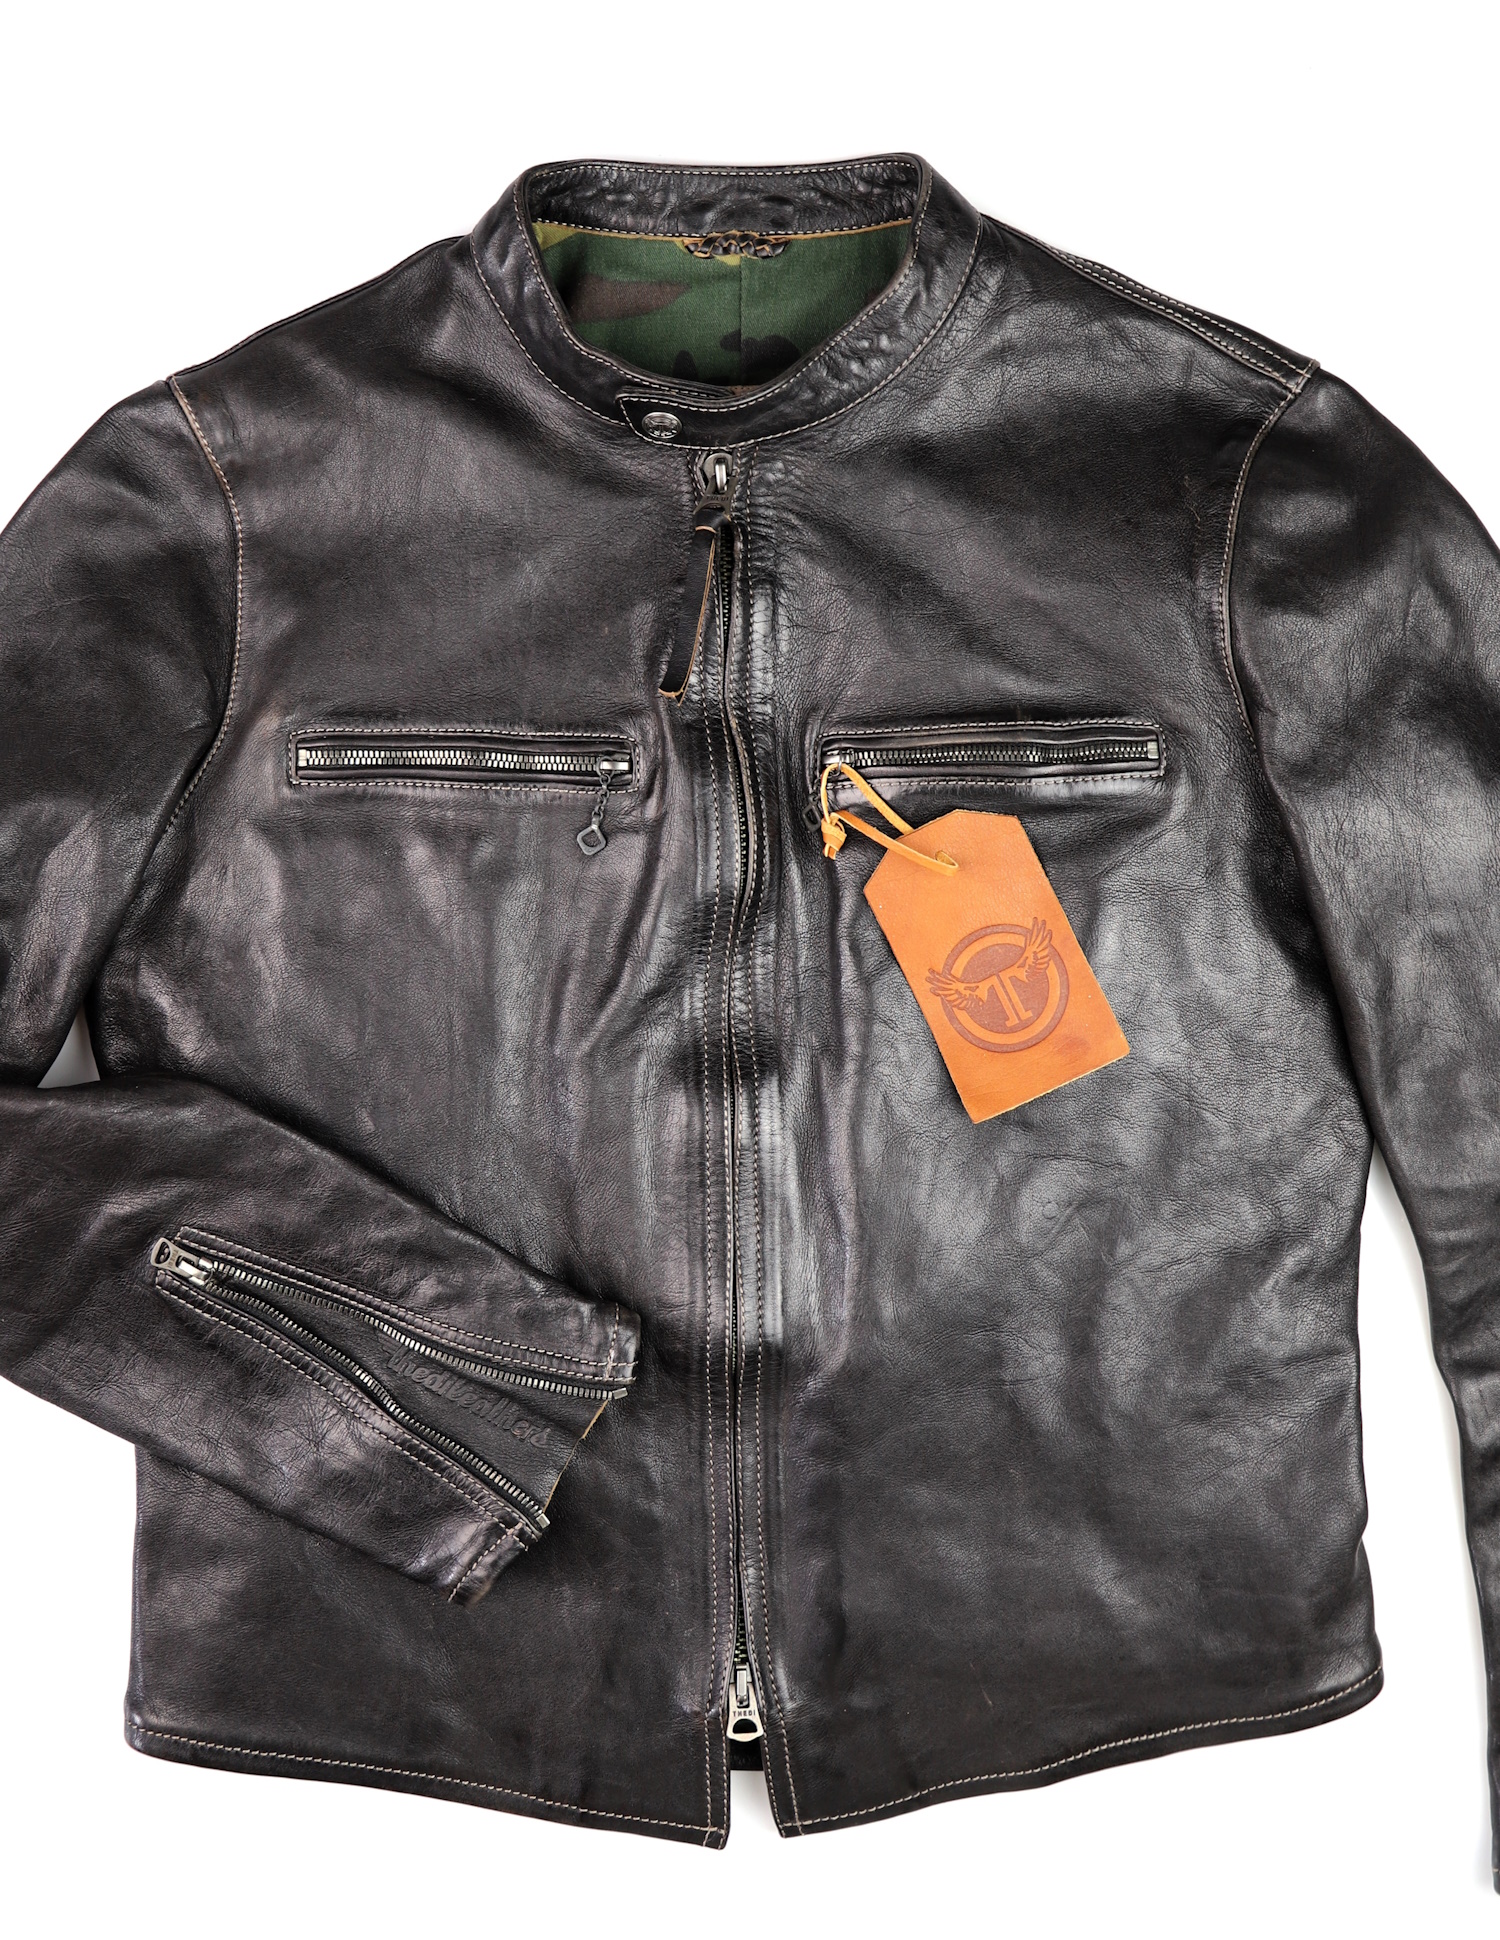 Thedi Phenix Unquilted Black Teacore Bruciato Horsehide Large front.jpg